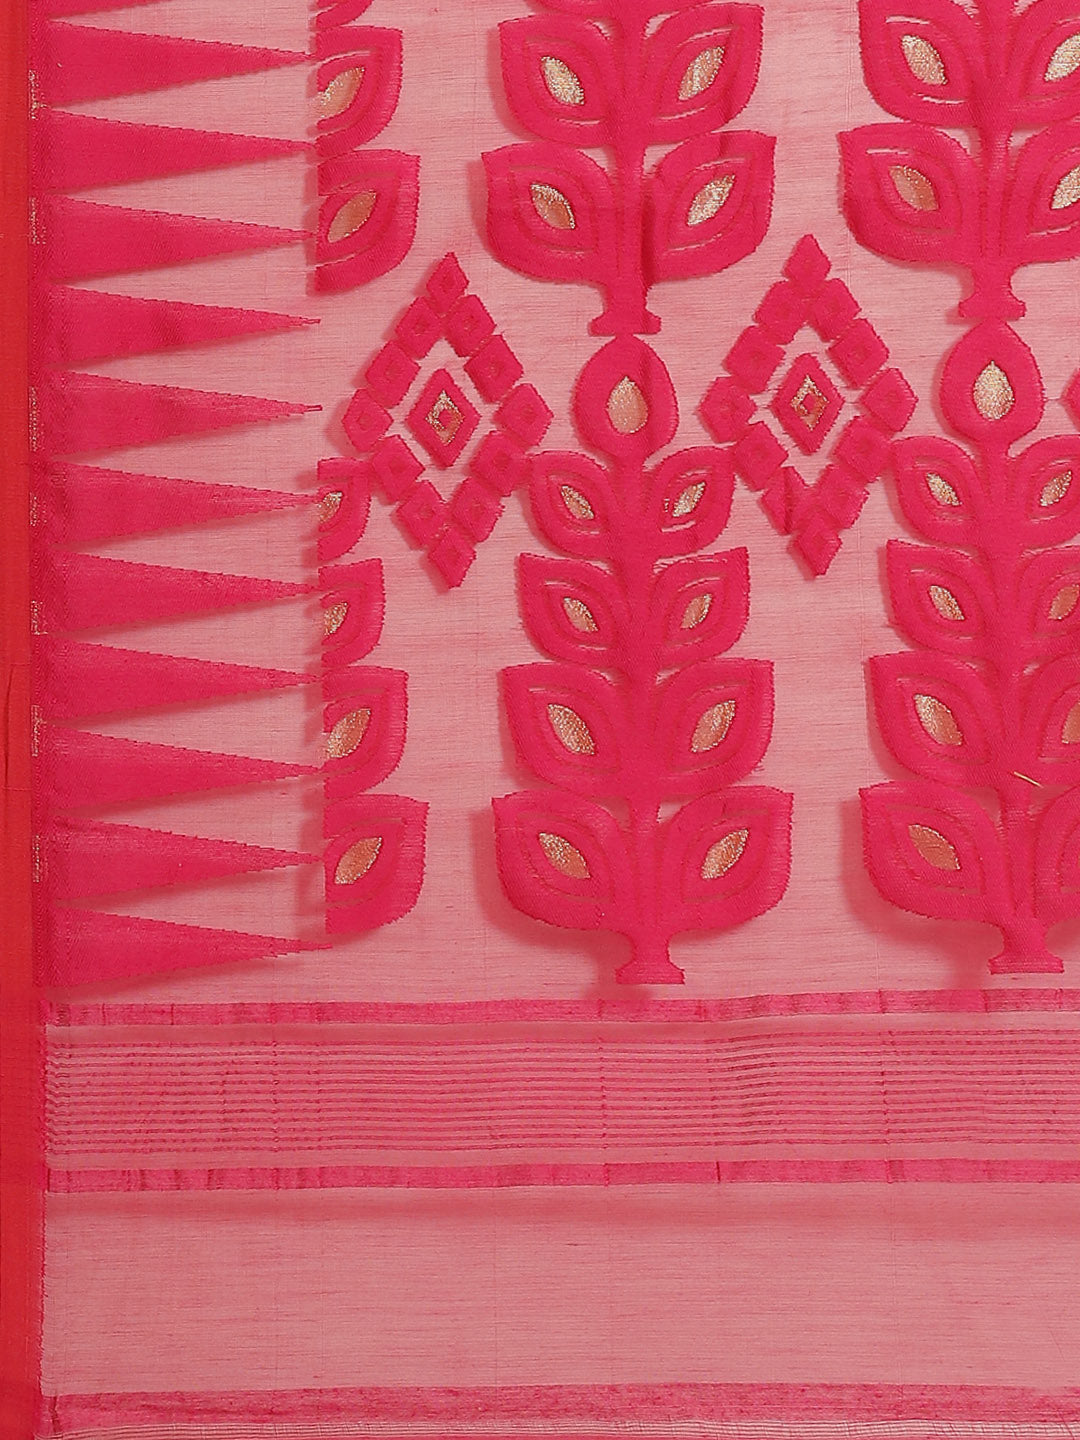 Magenta and Cream, Kalakari India Jamdani Silk Cotton Woven Design Saree without blouse CHBHSA0005-Saree-Kalakari India-CHBHSA0005-Bengal, Geographical Indication, Hand Crafted, Hand Painted, Heritage Prints, Jamdani, Natural Dyes, Red, Sarees, Silk Blended, Sustainable Fabrics, Woven, Yellow-[Linen,Ethnic,wear,Fashionista,Handloom,Handicraft,Indigo,blockprint,block,print,Cotton,Chanderi,Blue, latest,classy,party,bollywood,trendy,summer,style,traditional,formal,elegant,unique,style,hand,block,pr